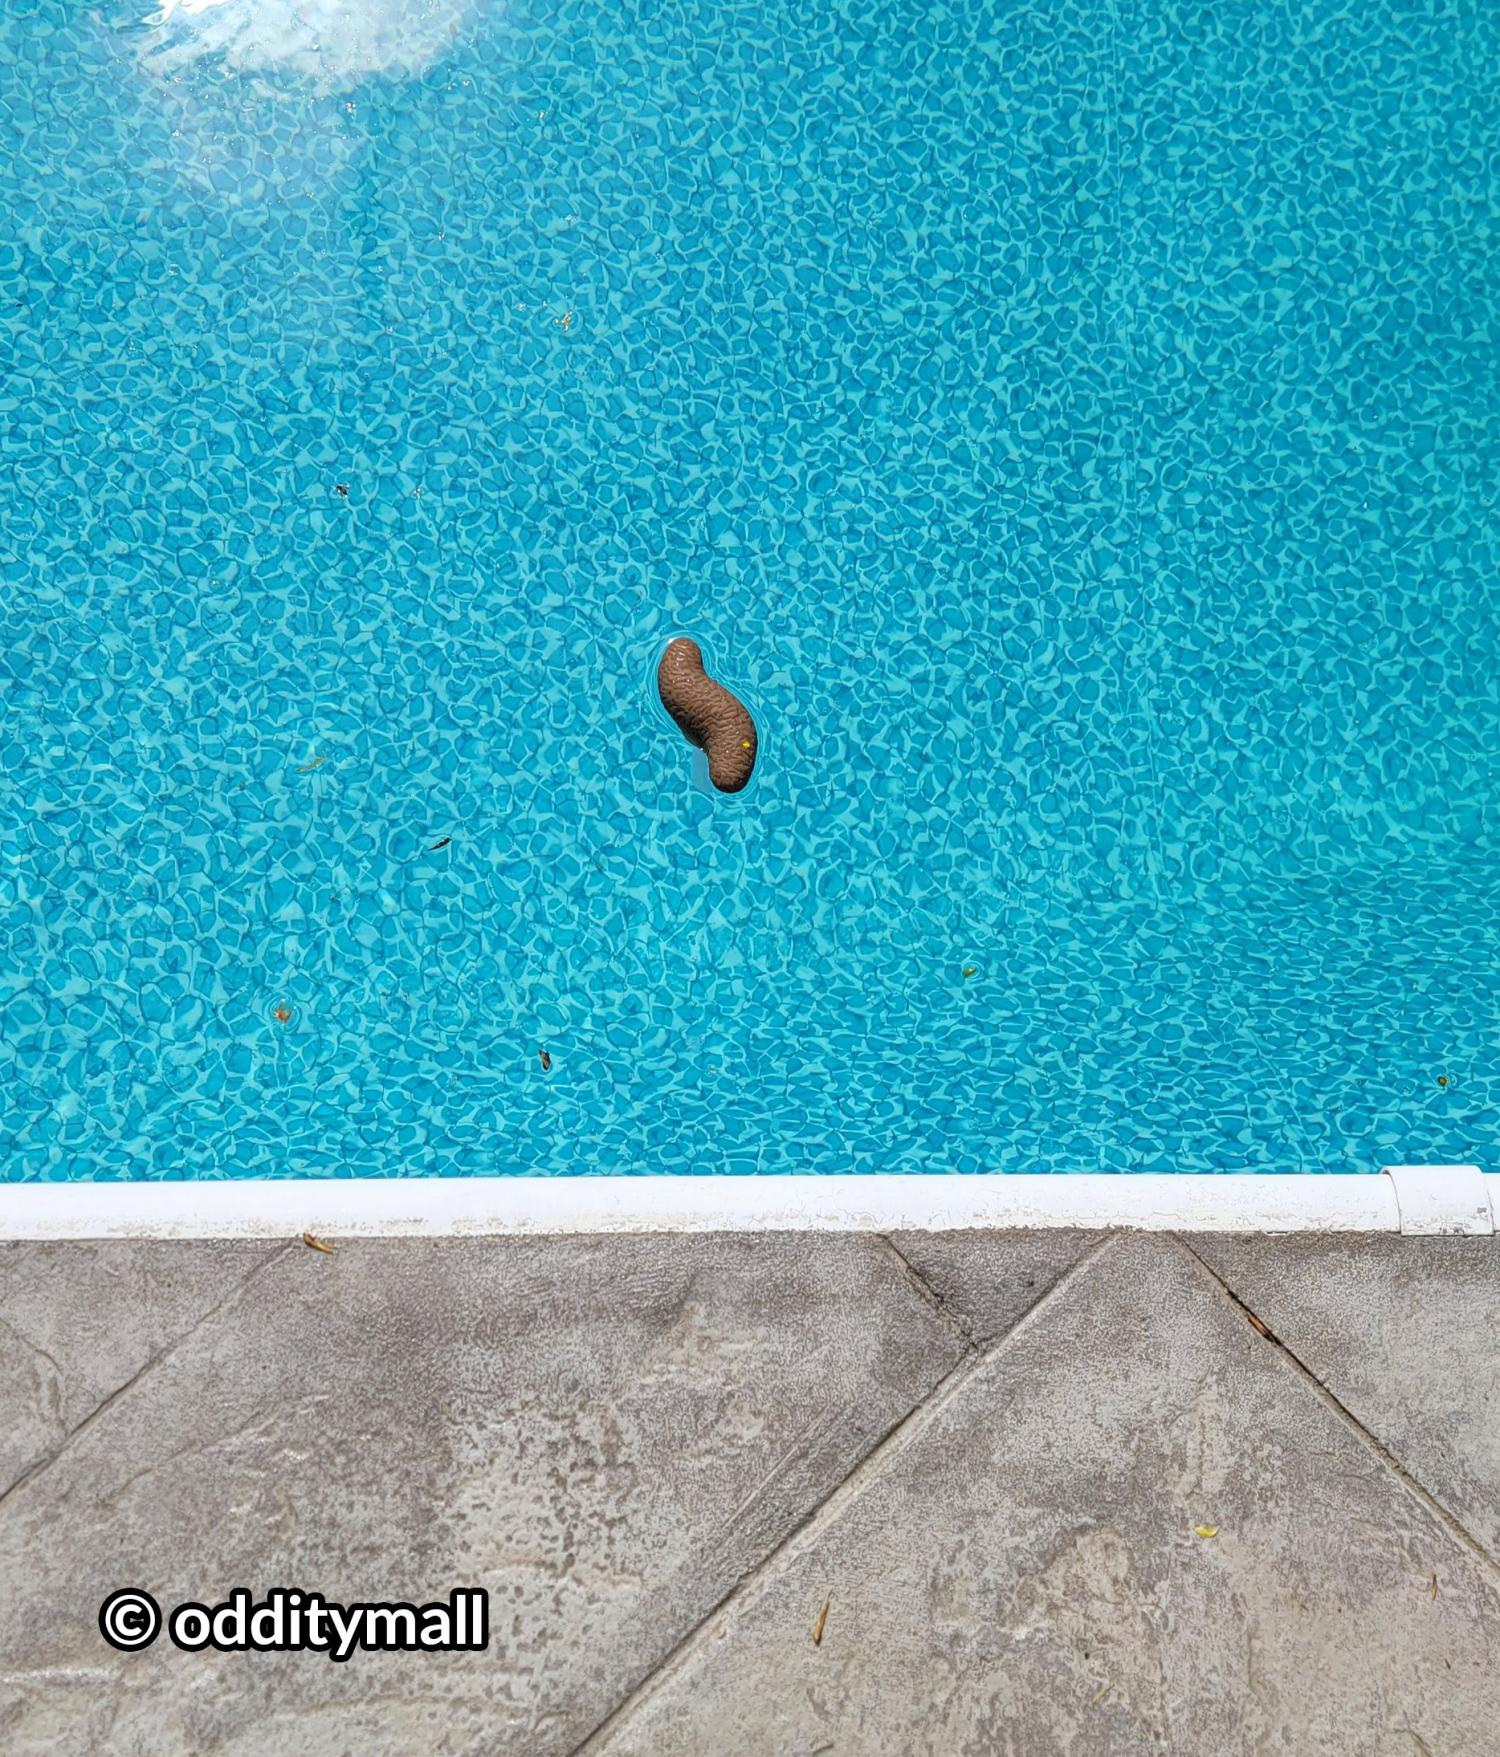 Poop Shaped pool thermometer - poo thermometer